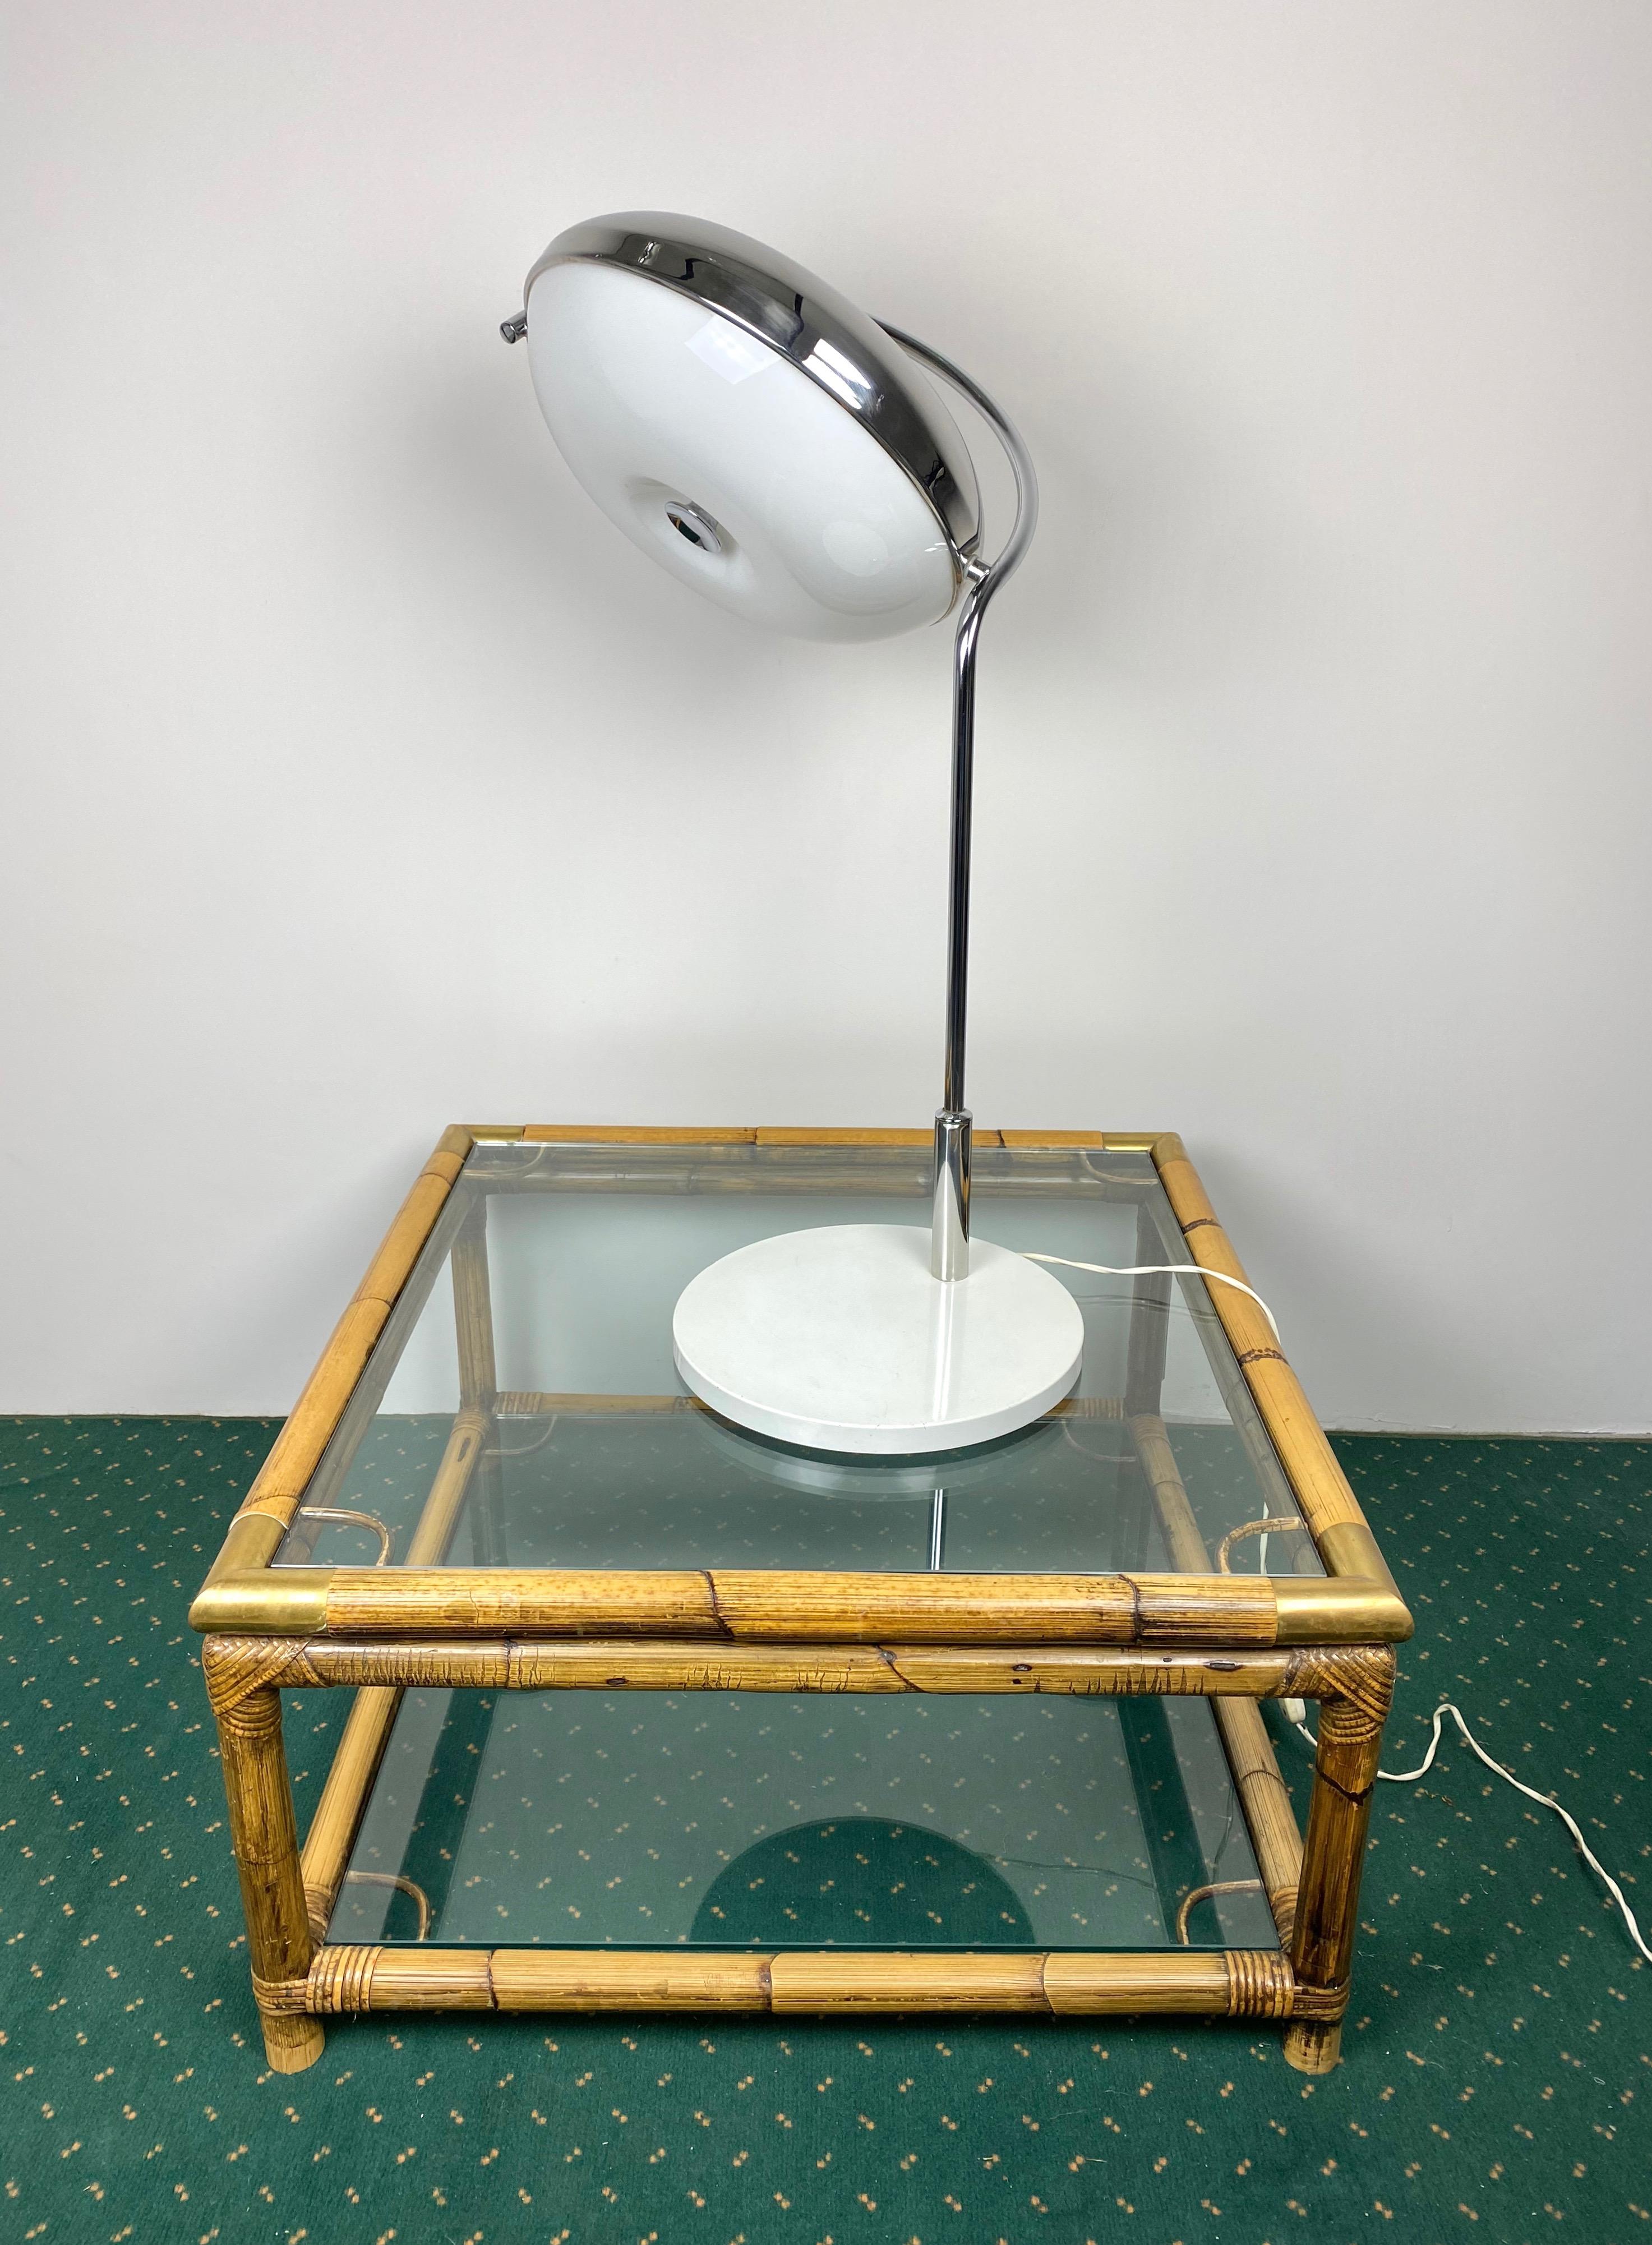 Reggiani Adjustable Table Lamp in Chrome and Plexiglass, Italy, 1970s For Sale 1